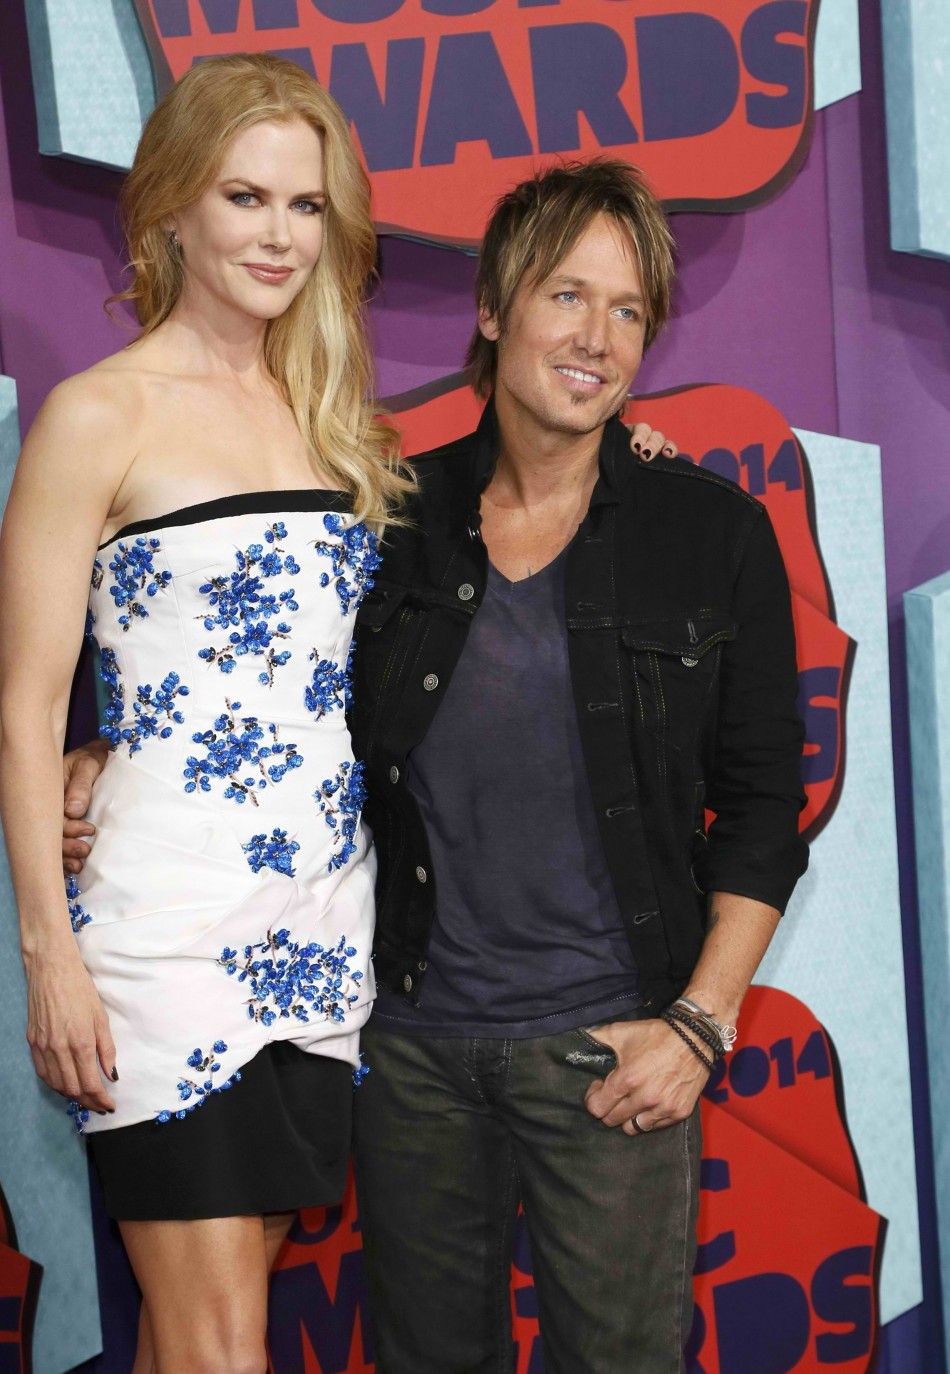 Actress Nicole Kidman and her husband, musician Keith Urban, arrive at the 2014 CMT Music Awards